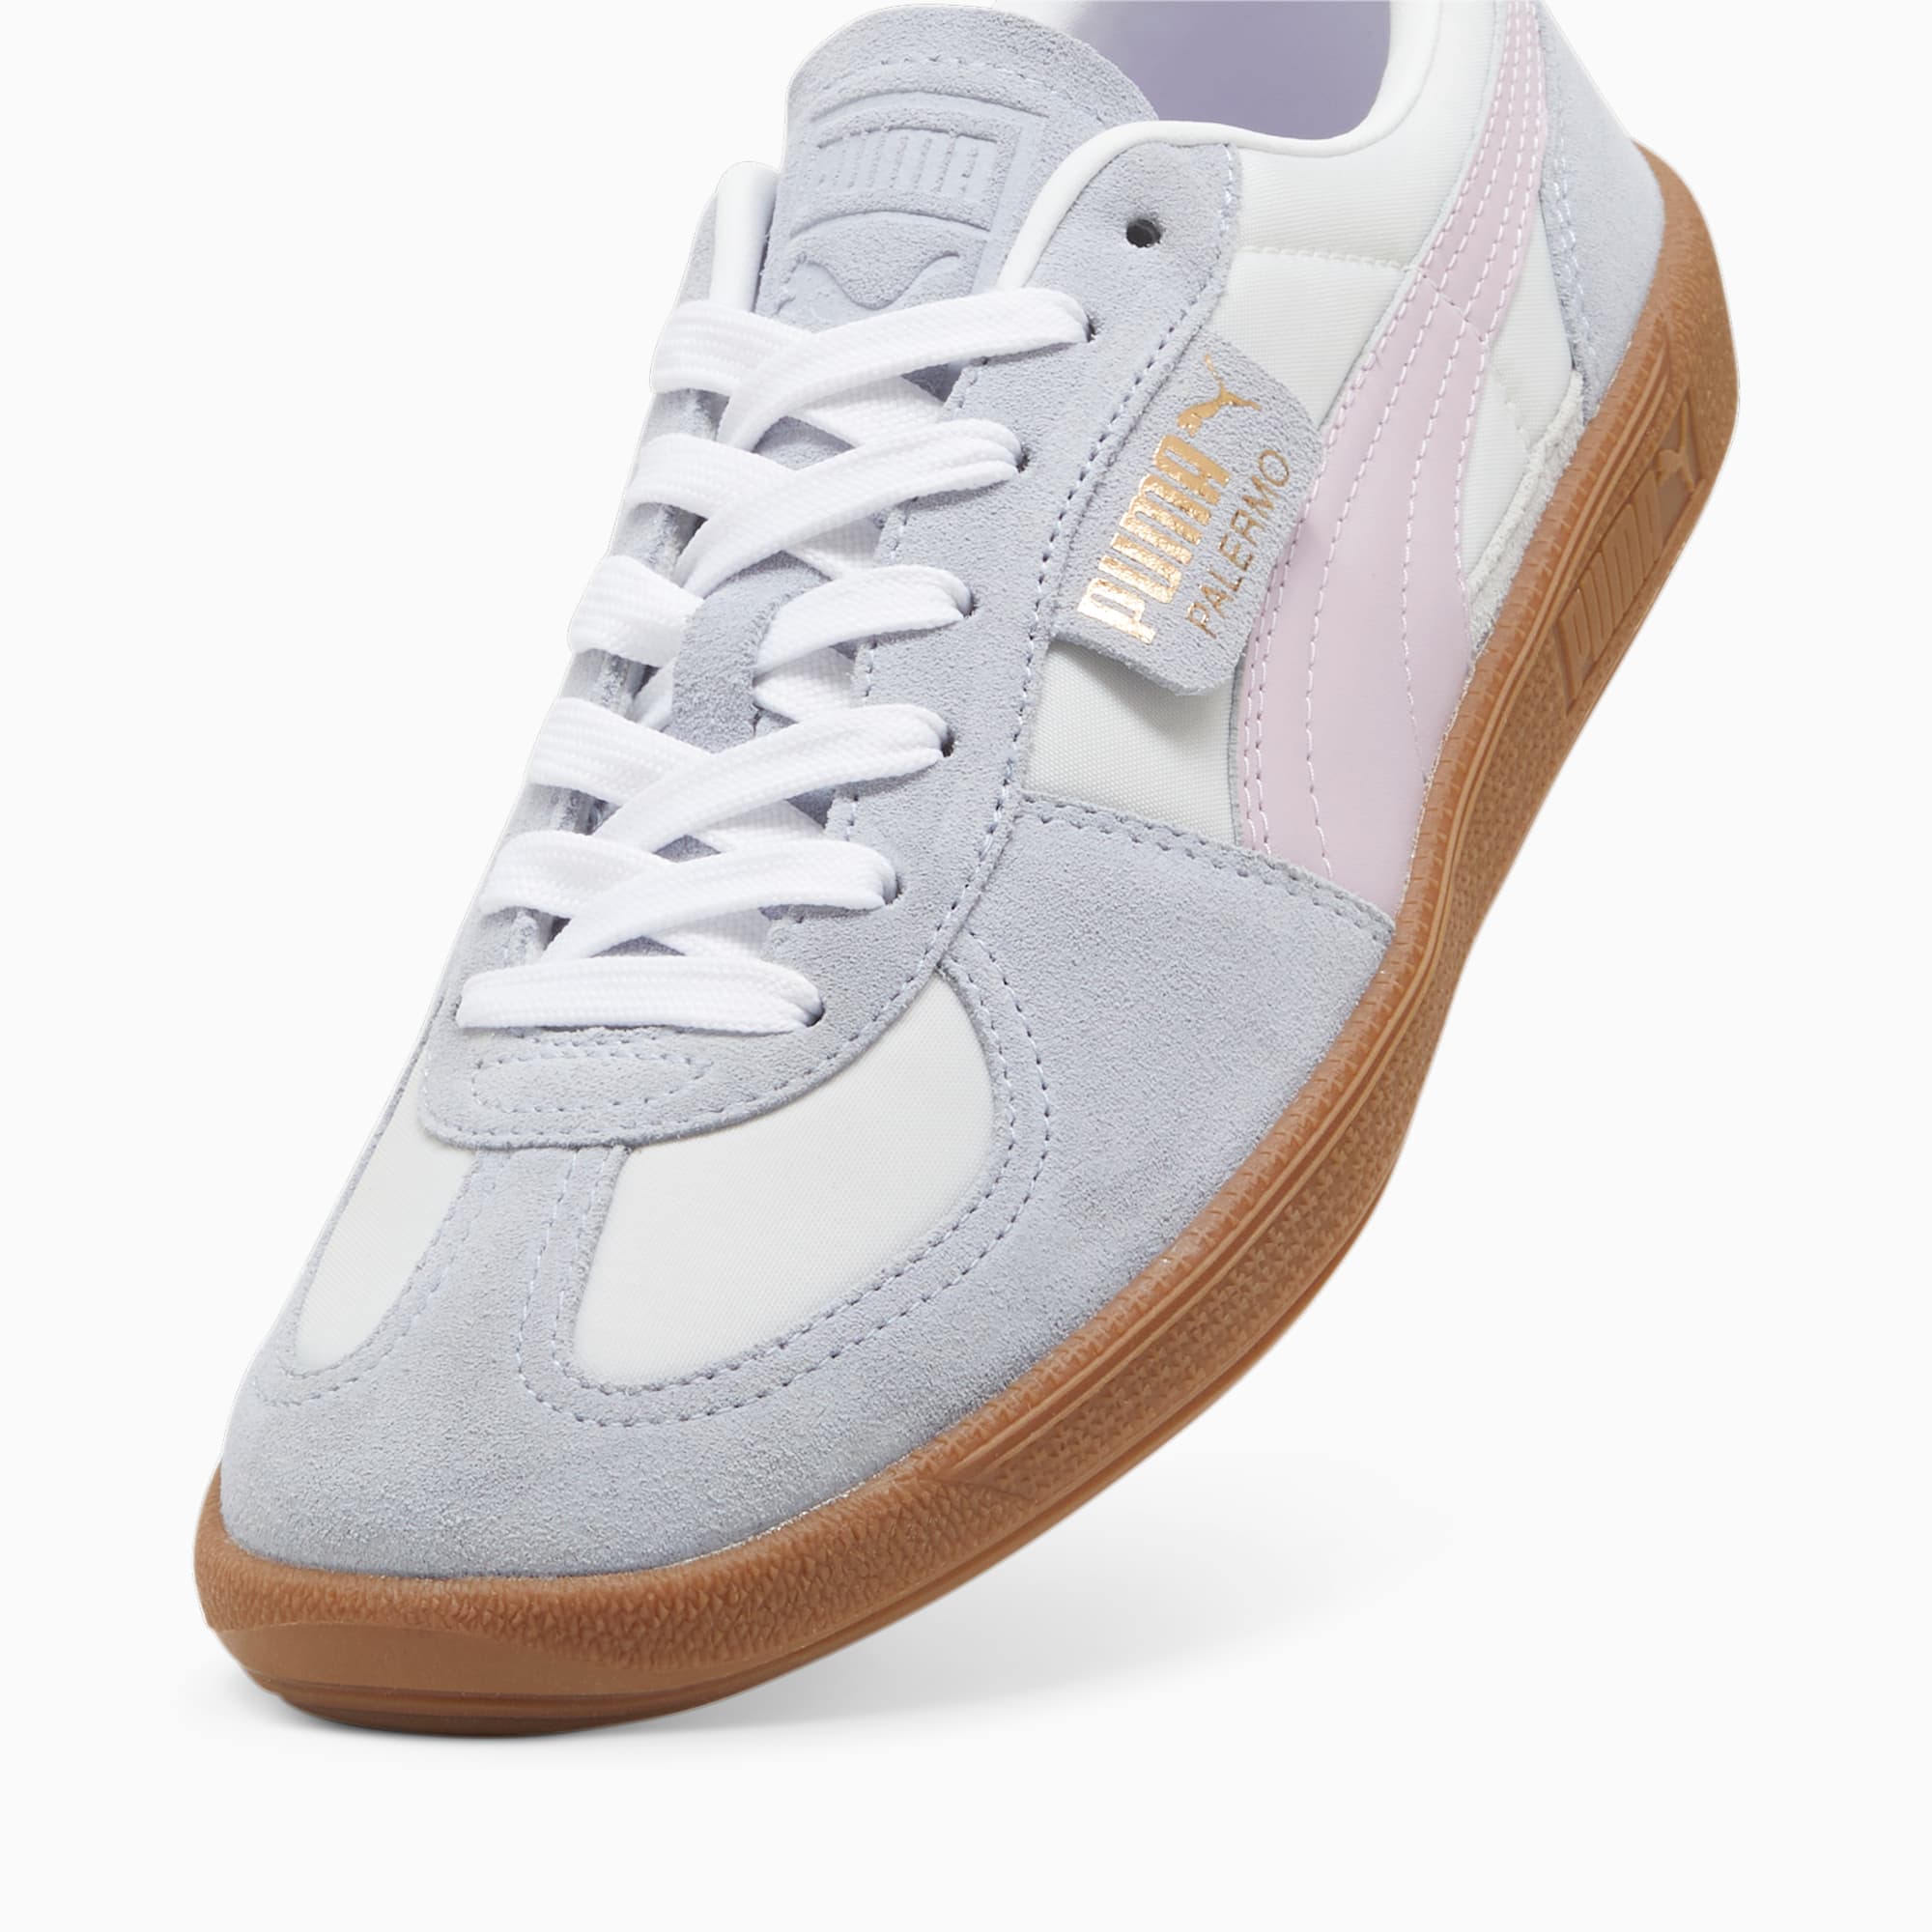 Women's PUMA Palermo OG Sneakers, Feather Grey/Grey Fog/Grape Mist, Size 35,5, Shoes